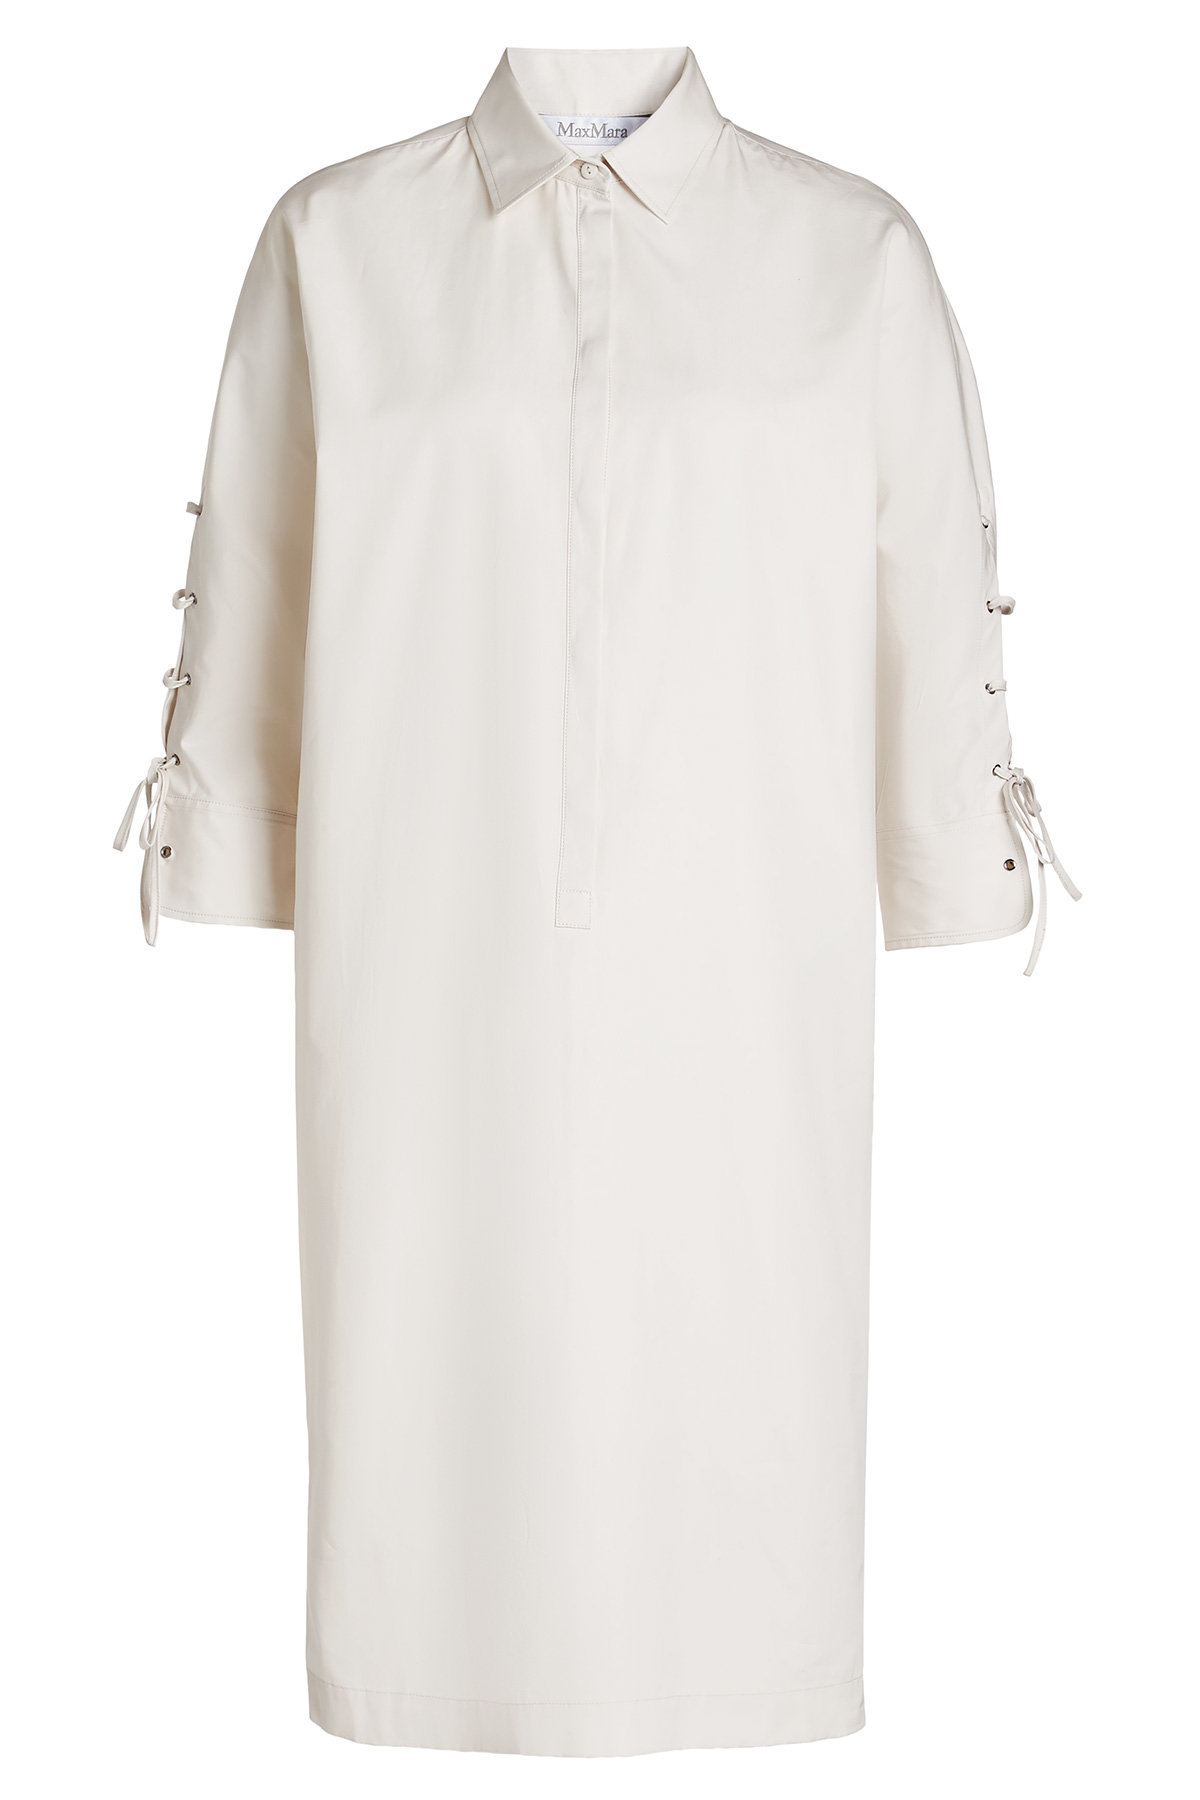 Cotton Dress with Lace-Up Detail by Max Mara